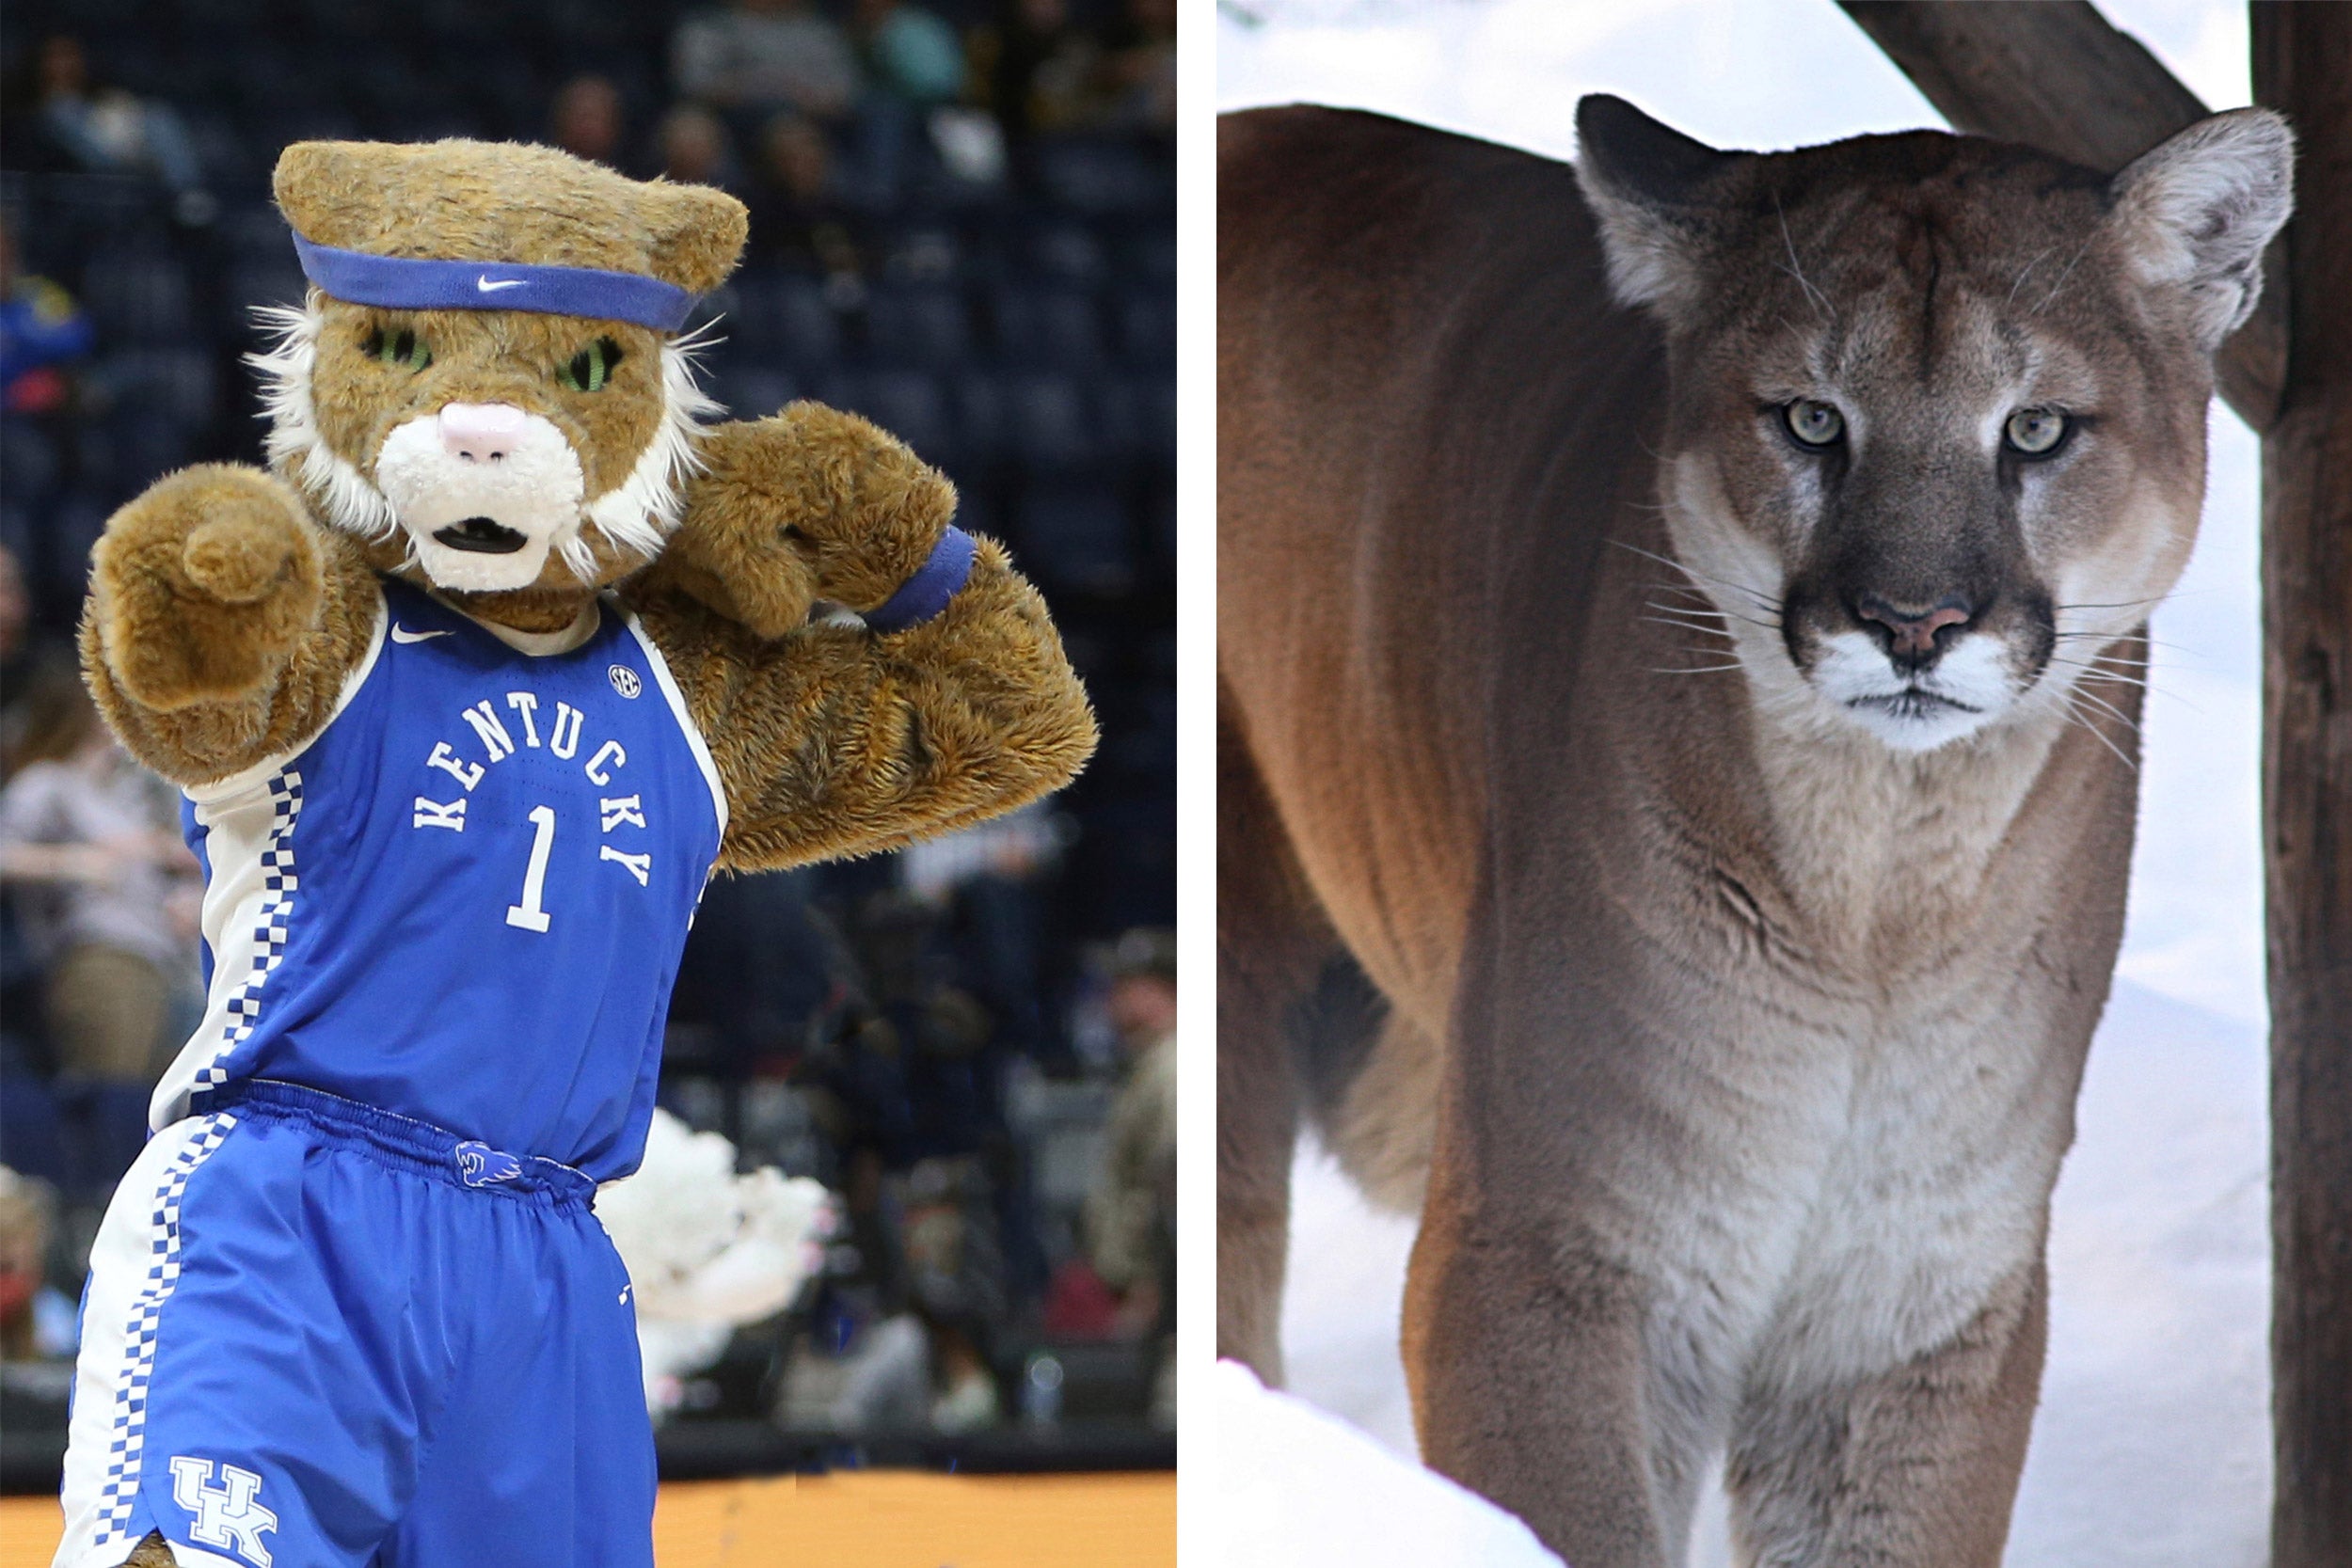 How much does your mascot head weigh?